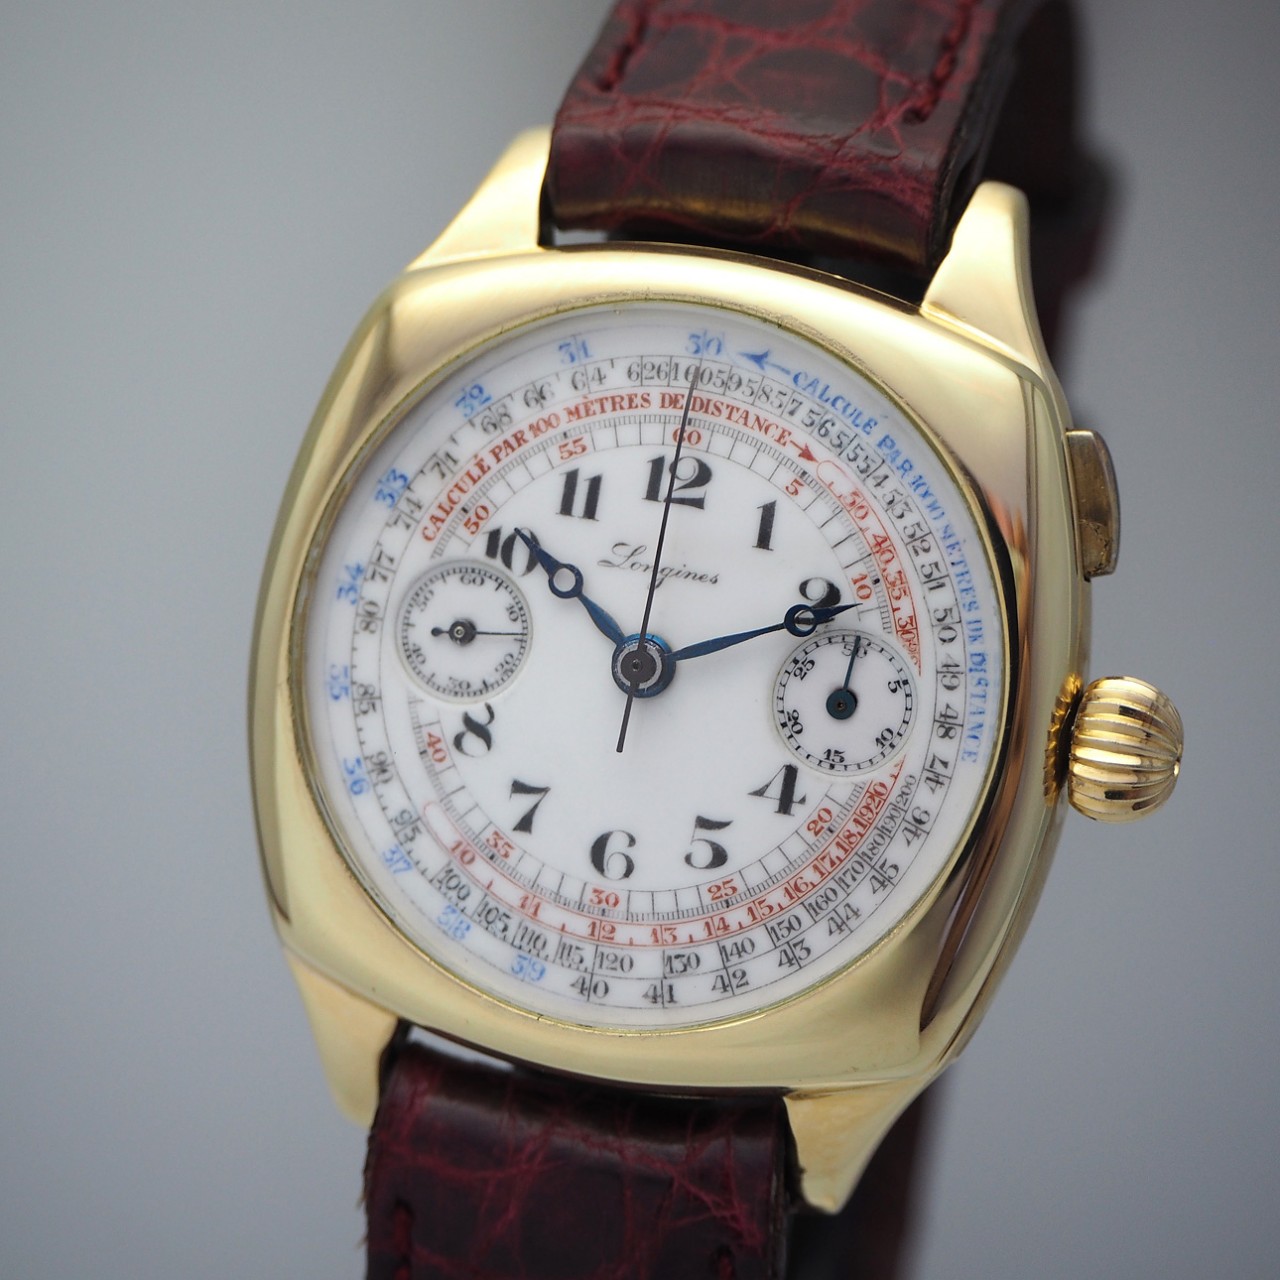 Longines vintage Chronograph 13.33 / 1935 -Gold 18k/750, Serviced+ Archiv-Extract -ULTRA RARE